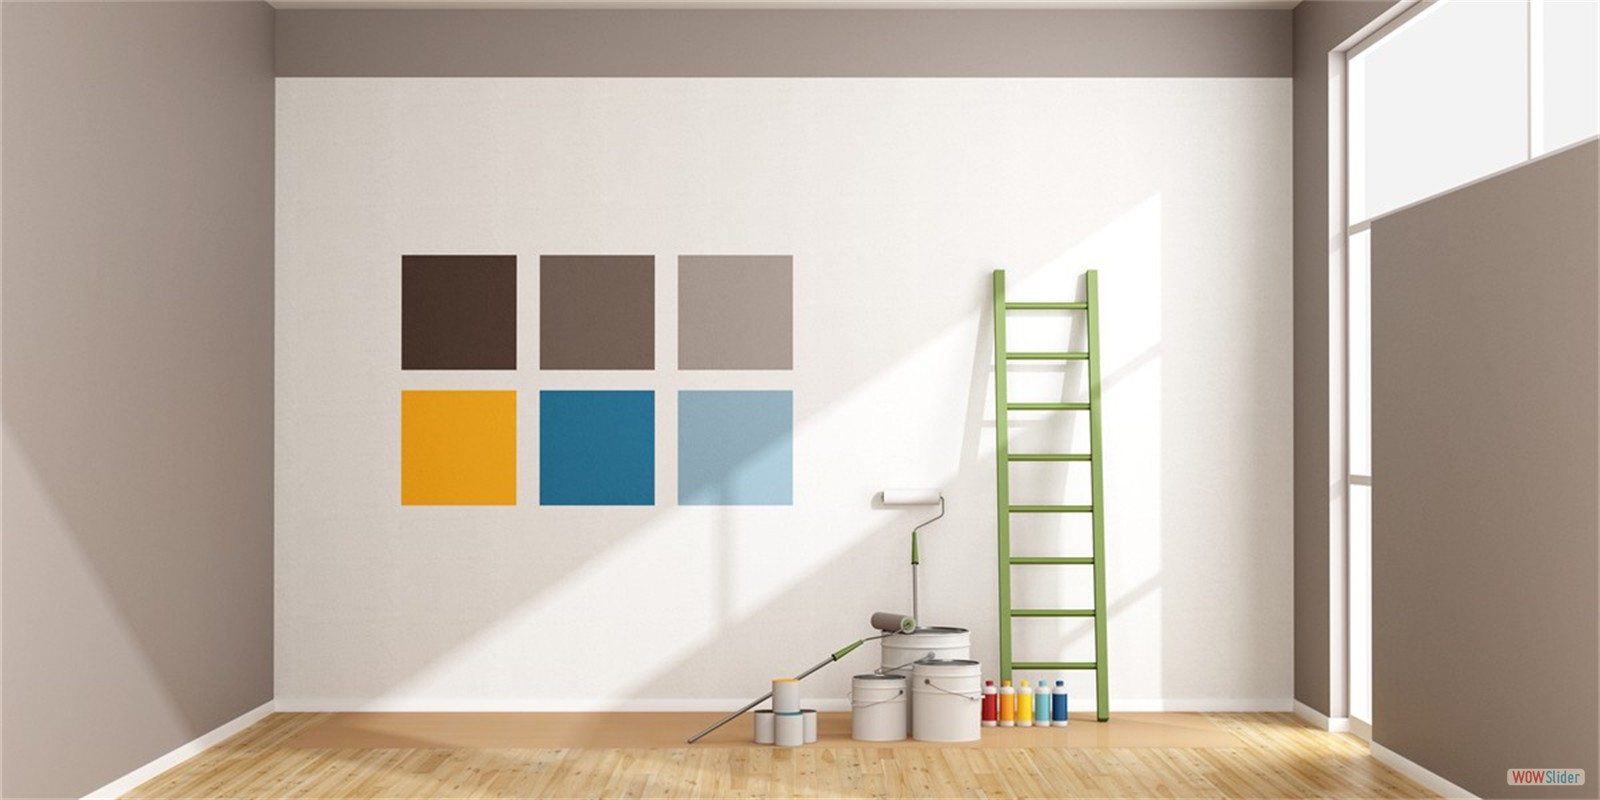 INTERIORS, PAINT, WALLBOARD AND MORE